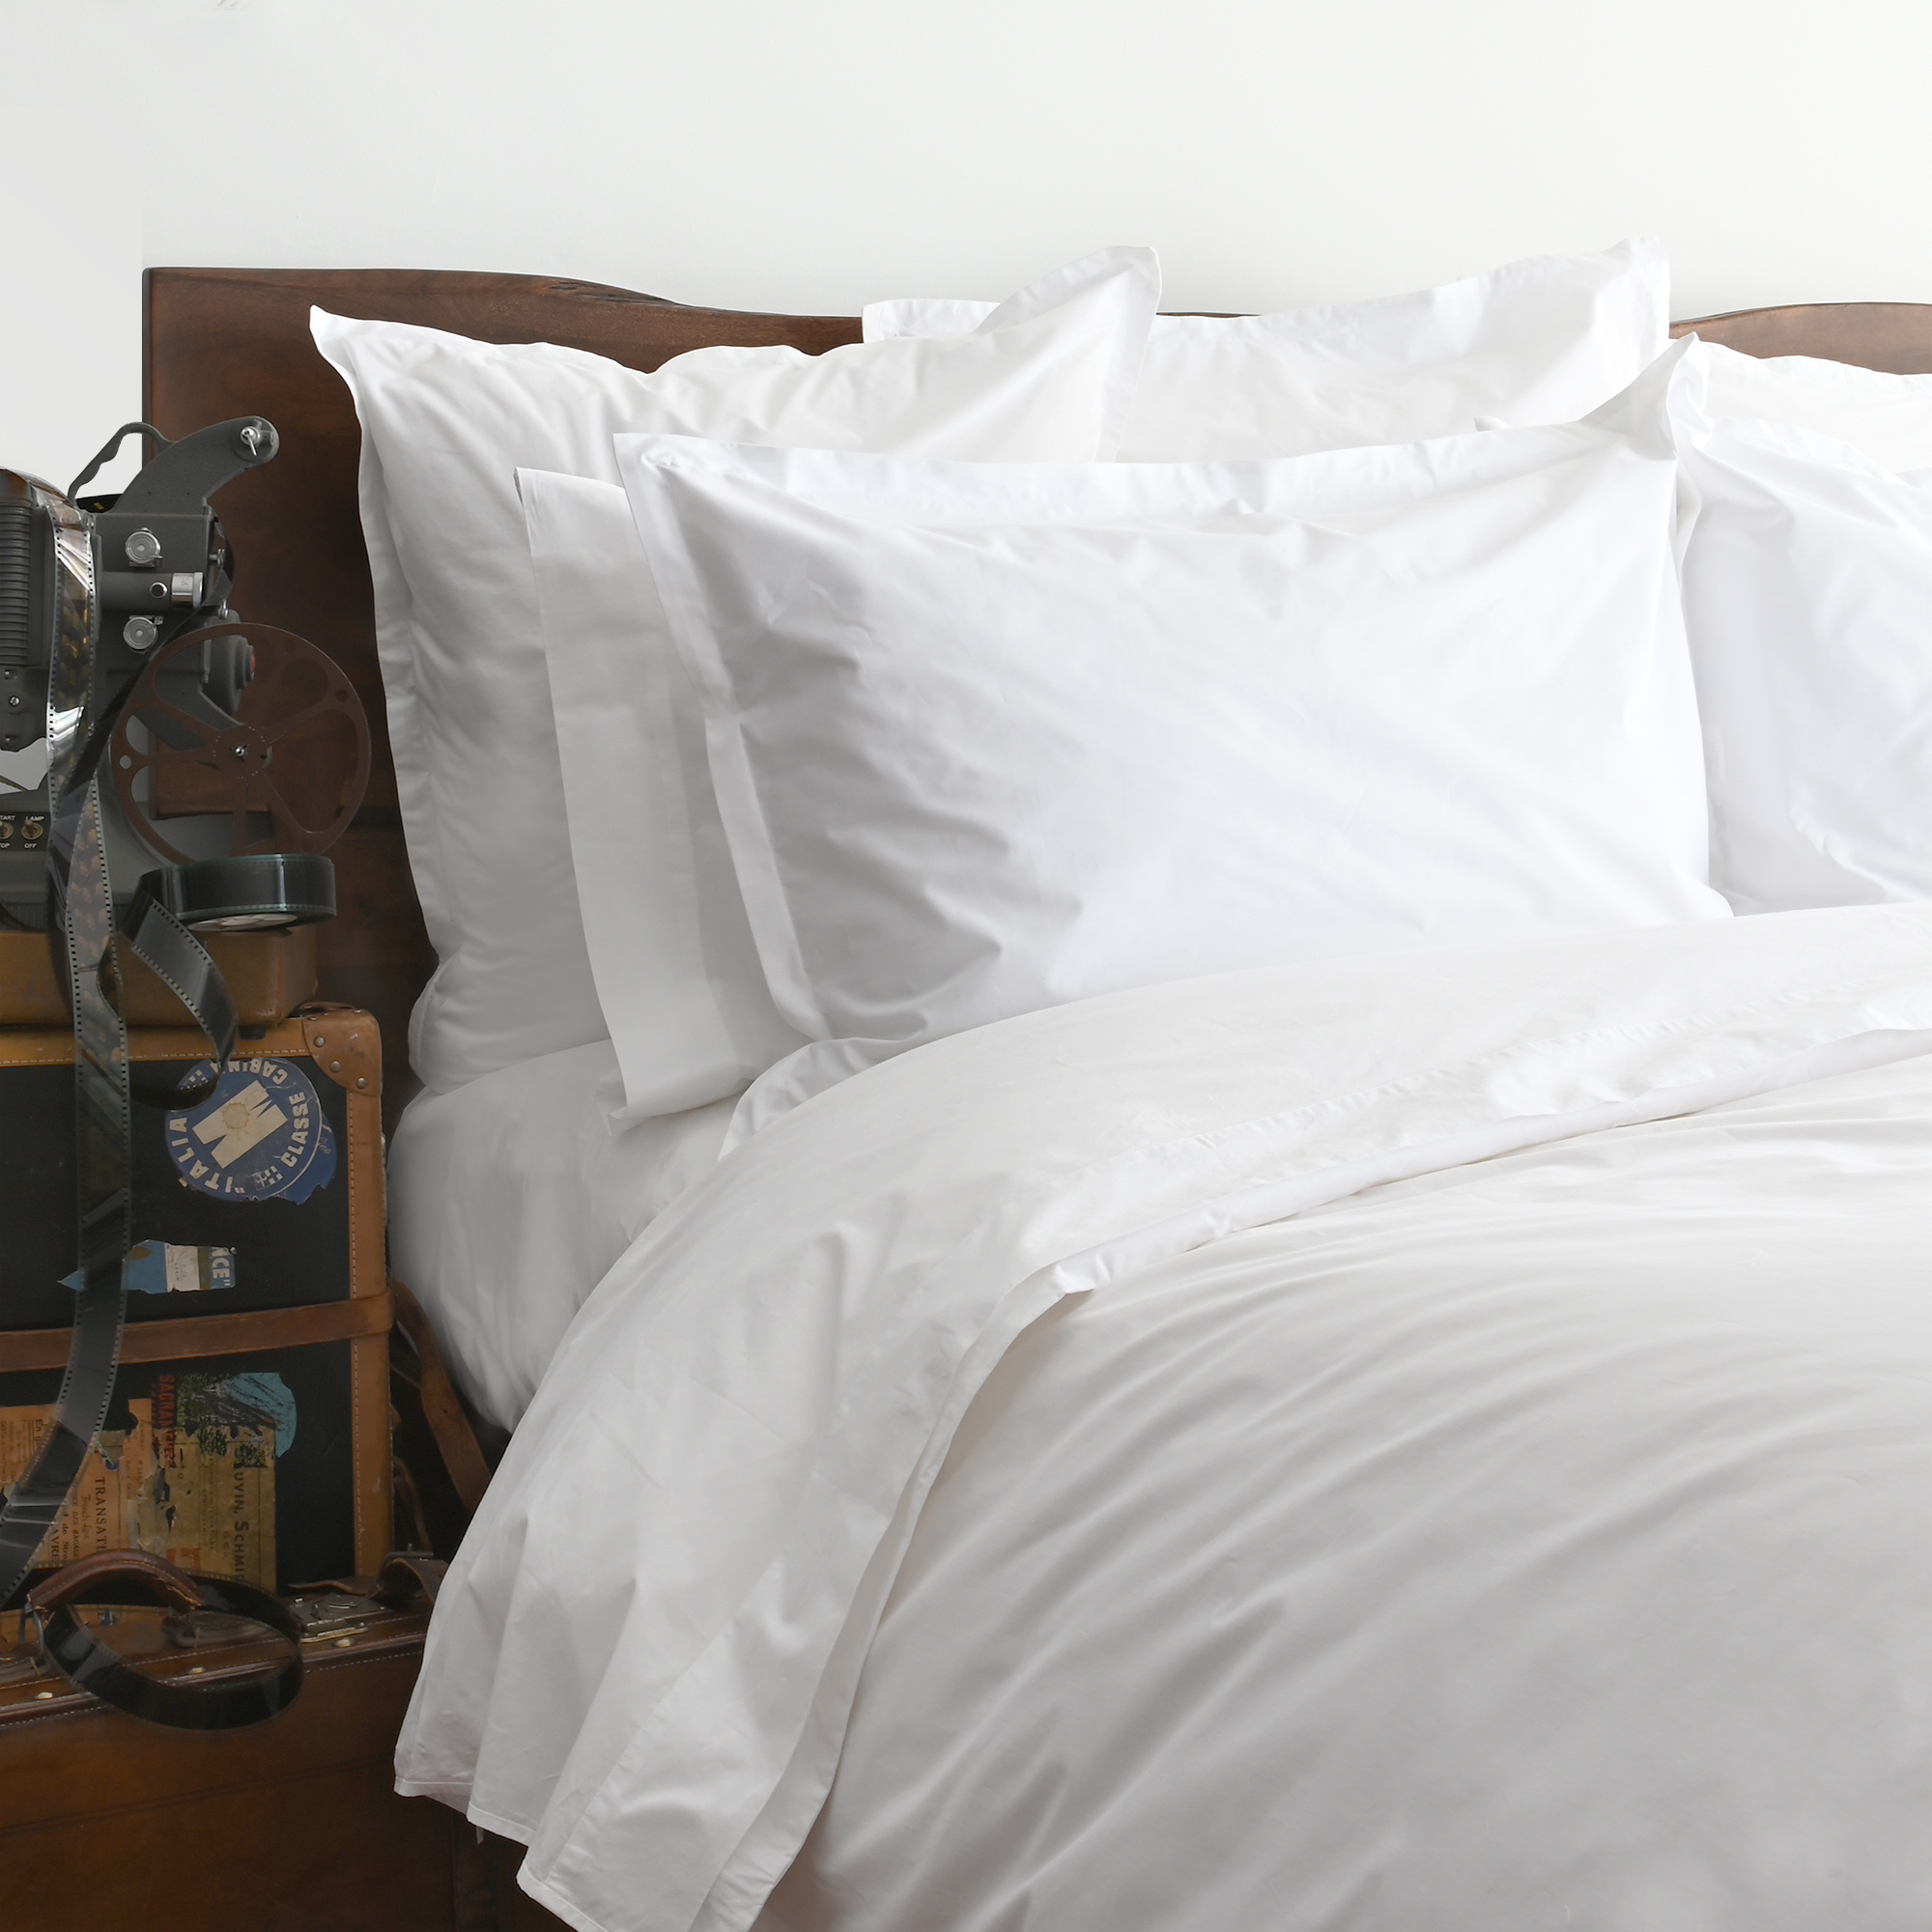 The Difference Between Sateen and Percale Bedding